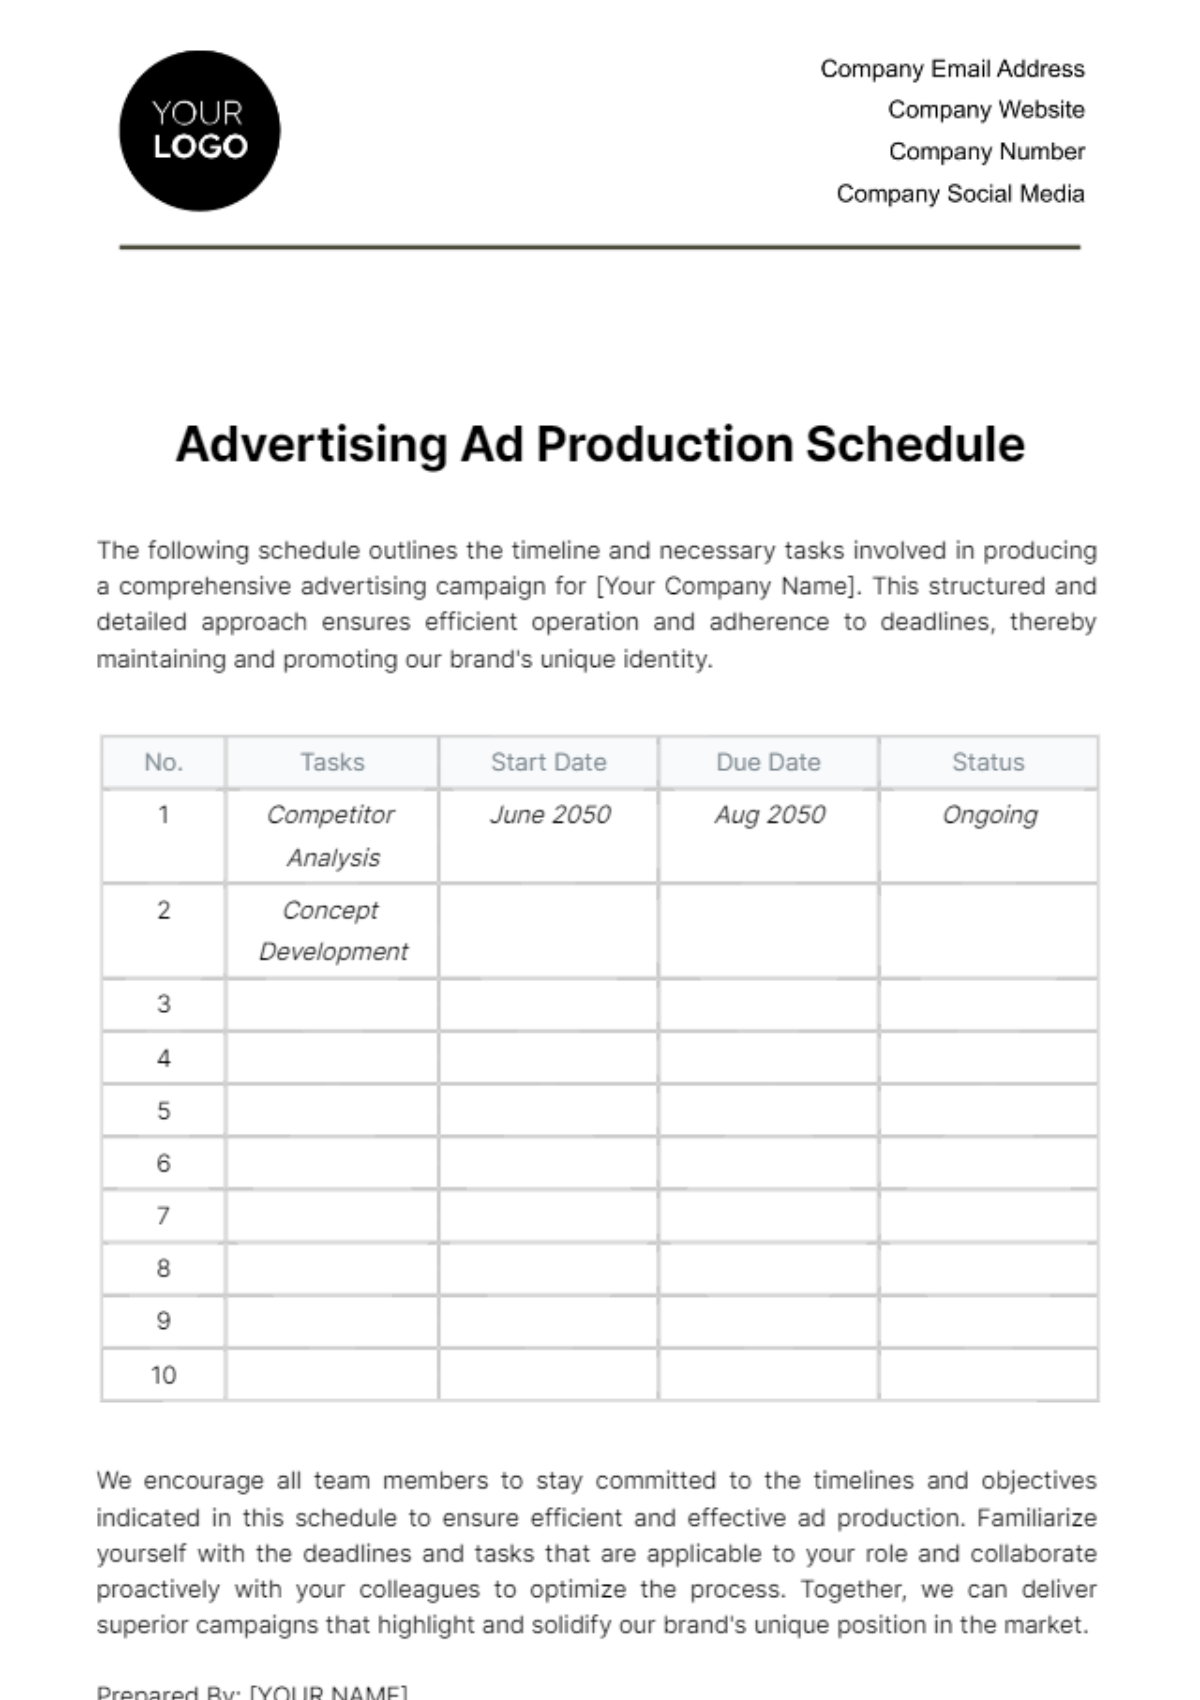 Free Advertising Ad Production Schedule Template